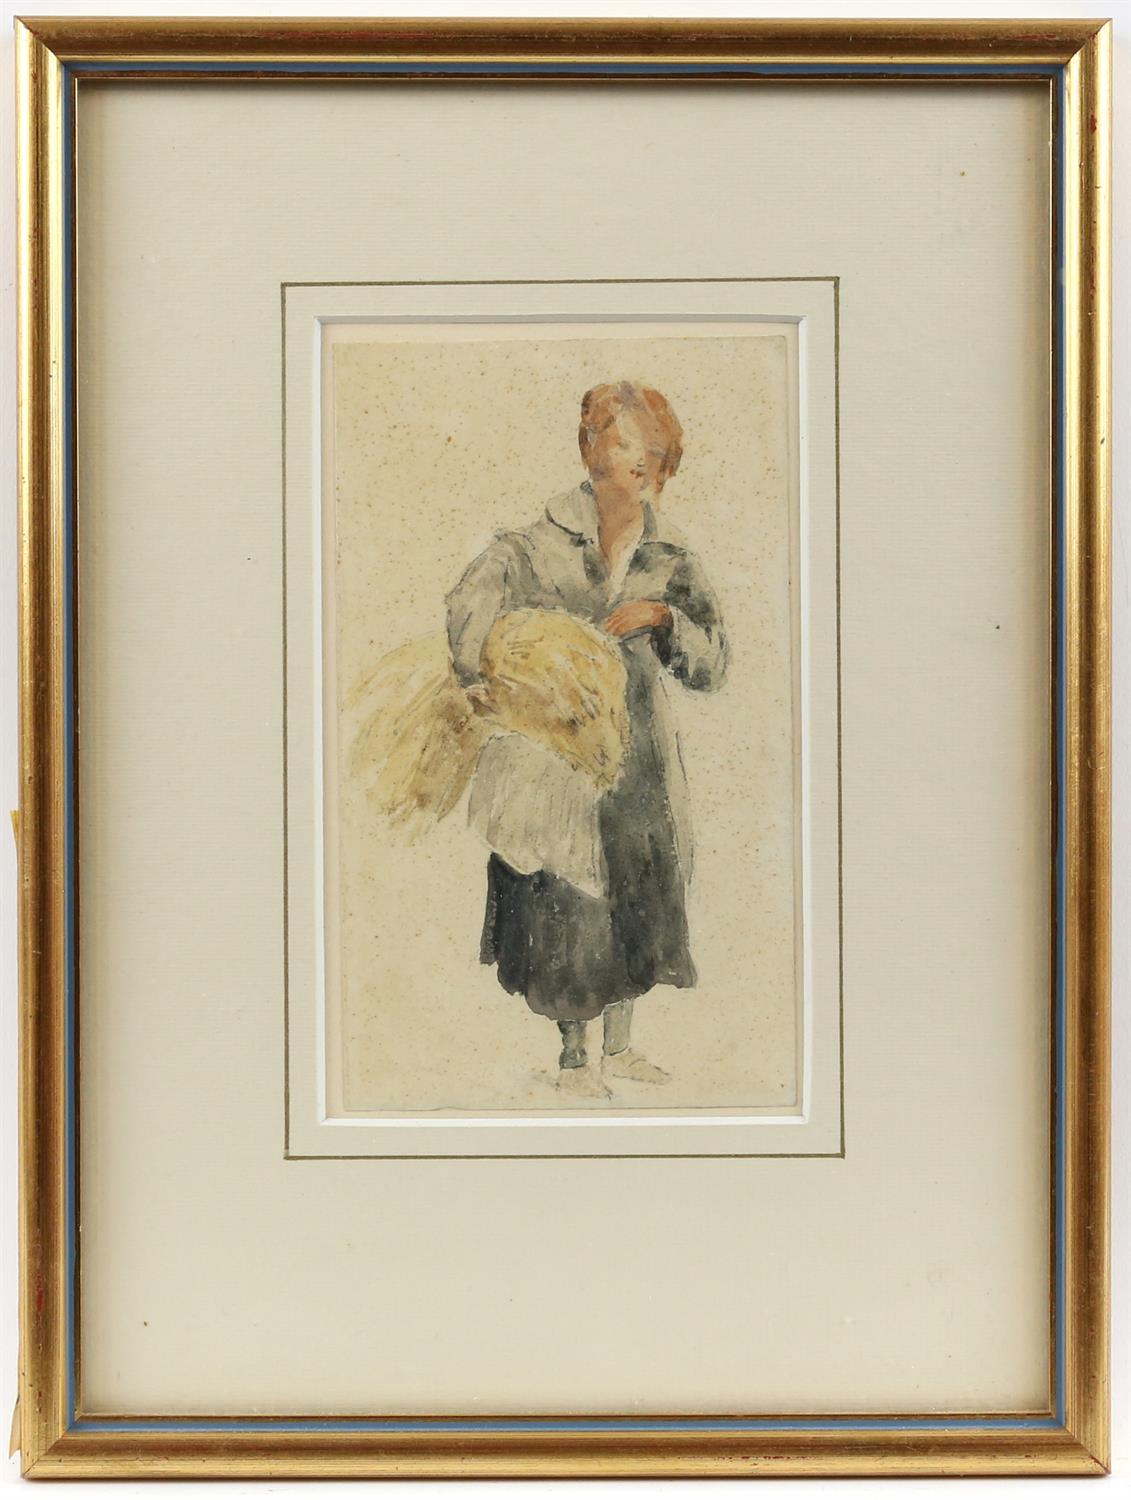 19th century English School, young woman carrying a sheath of corn, watercolour, 17.5cm x 10cm, - Image 2 of 3